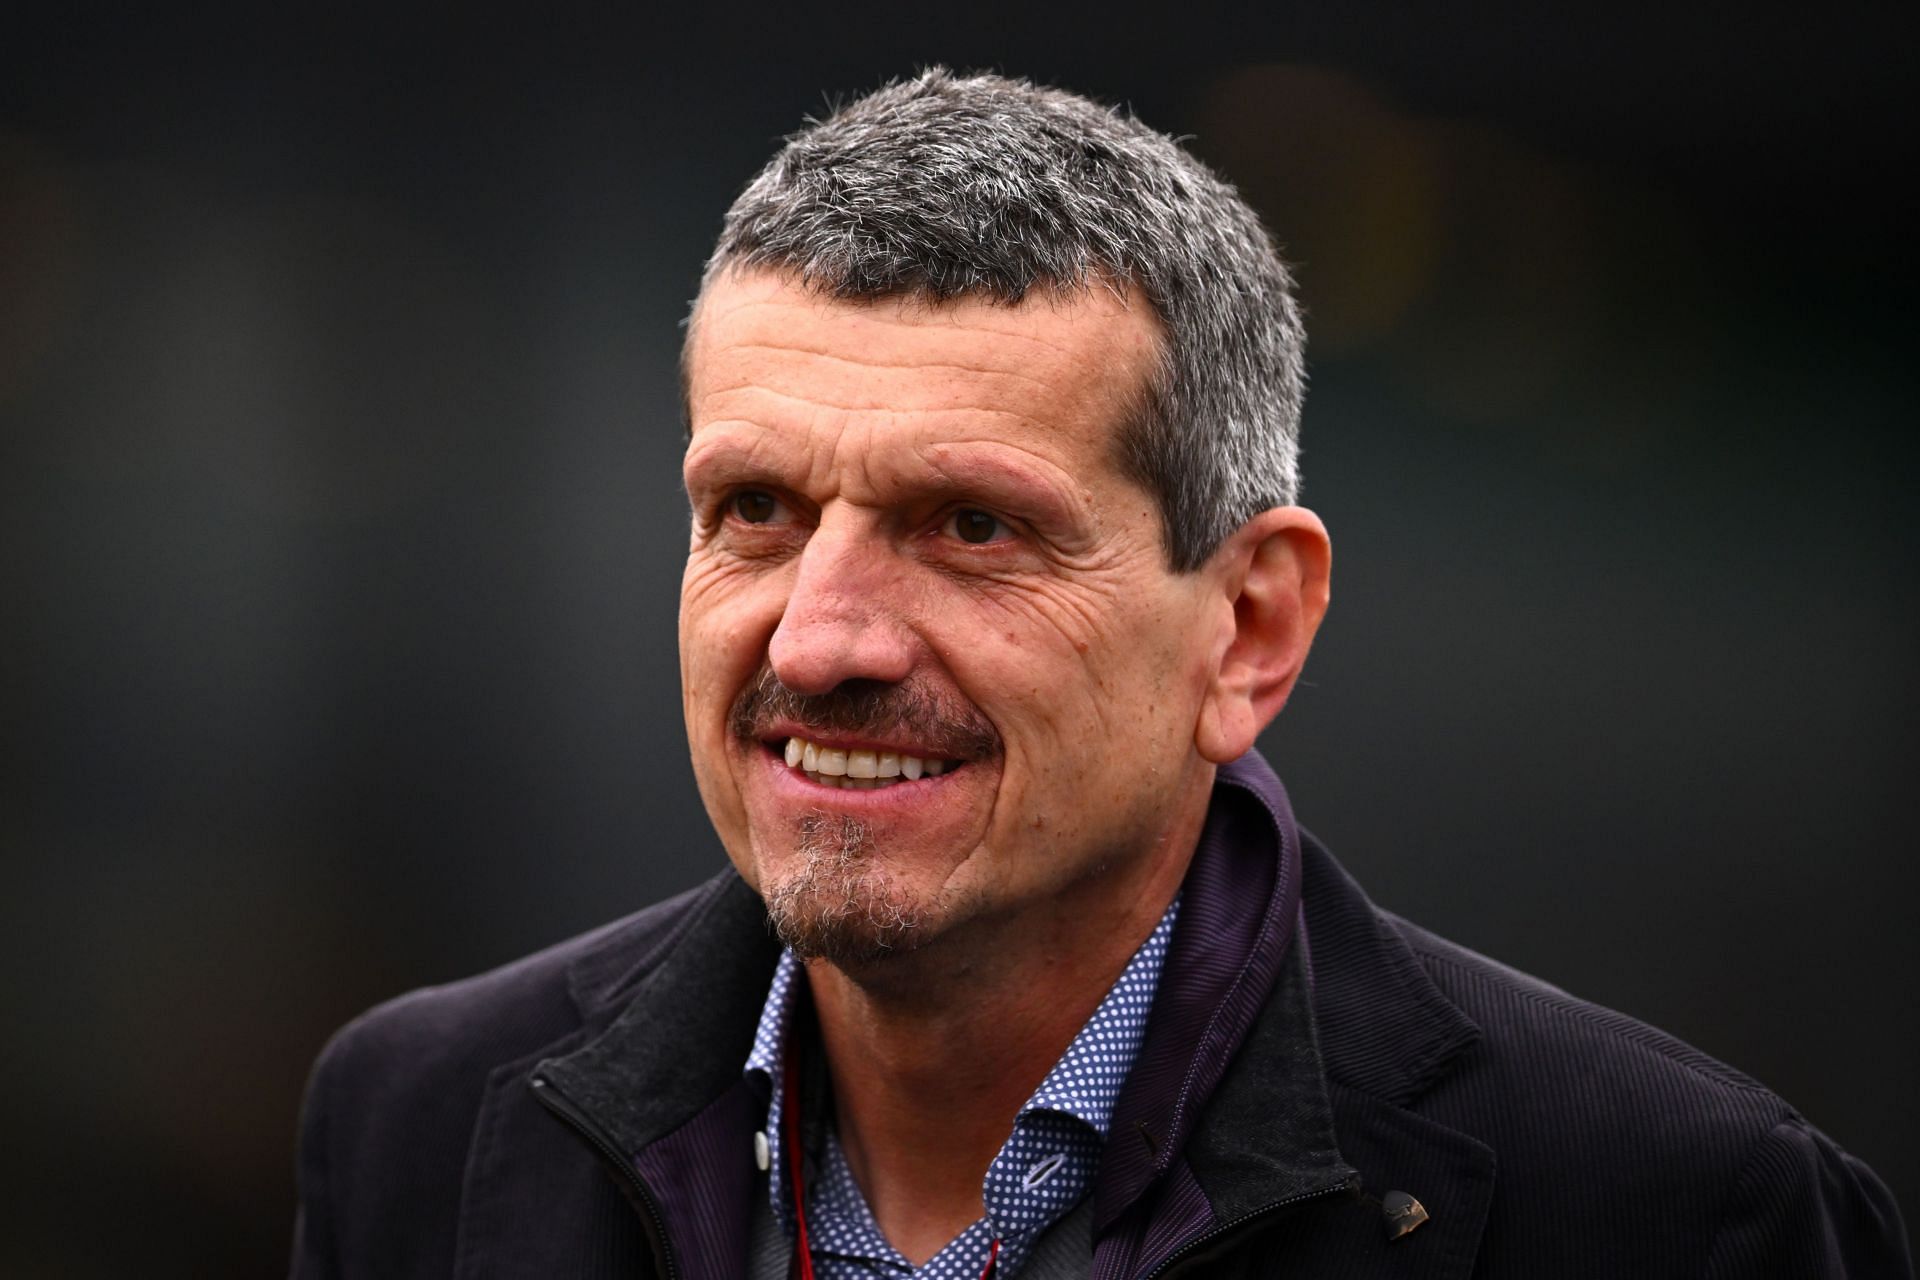 Haas F1 team principal Guenther Steiner walks in the Paddock during previews ahead of the F1 Grand Prix of Emilia Romagna (Photo by Clive Mason/Getty Images)